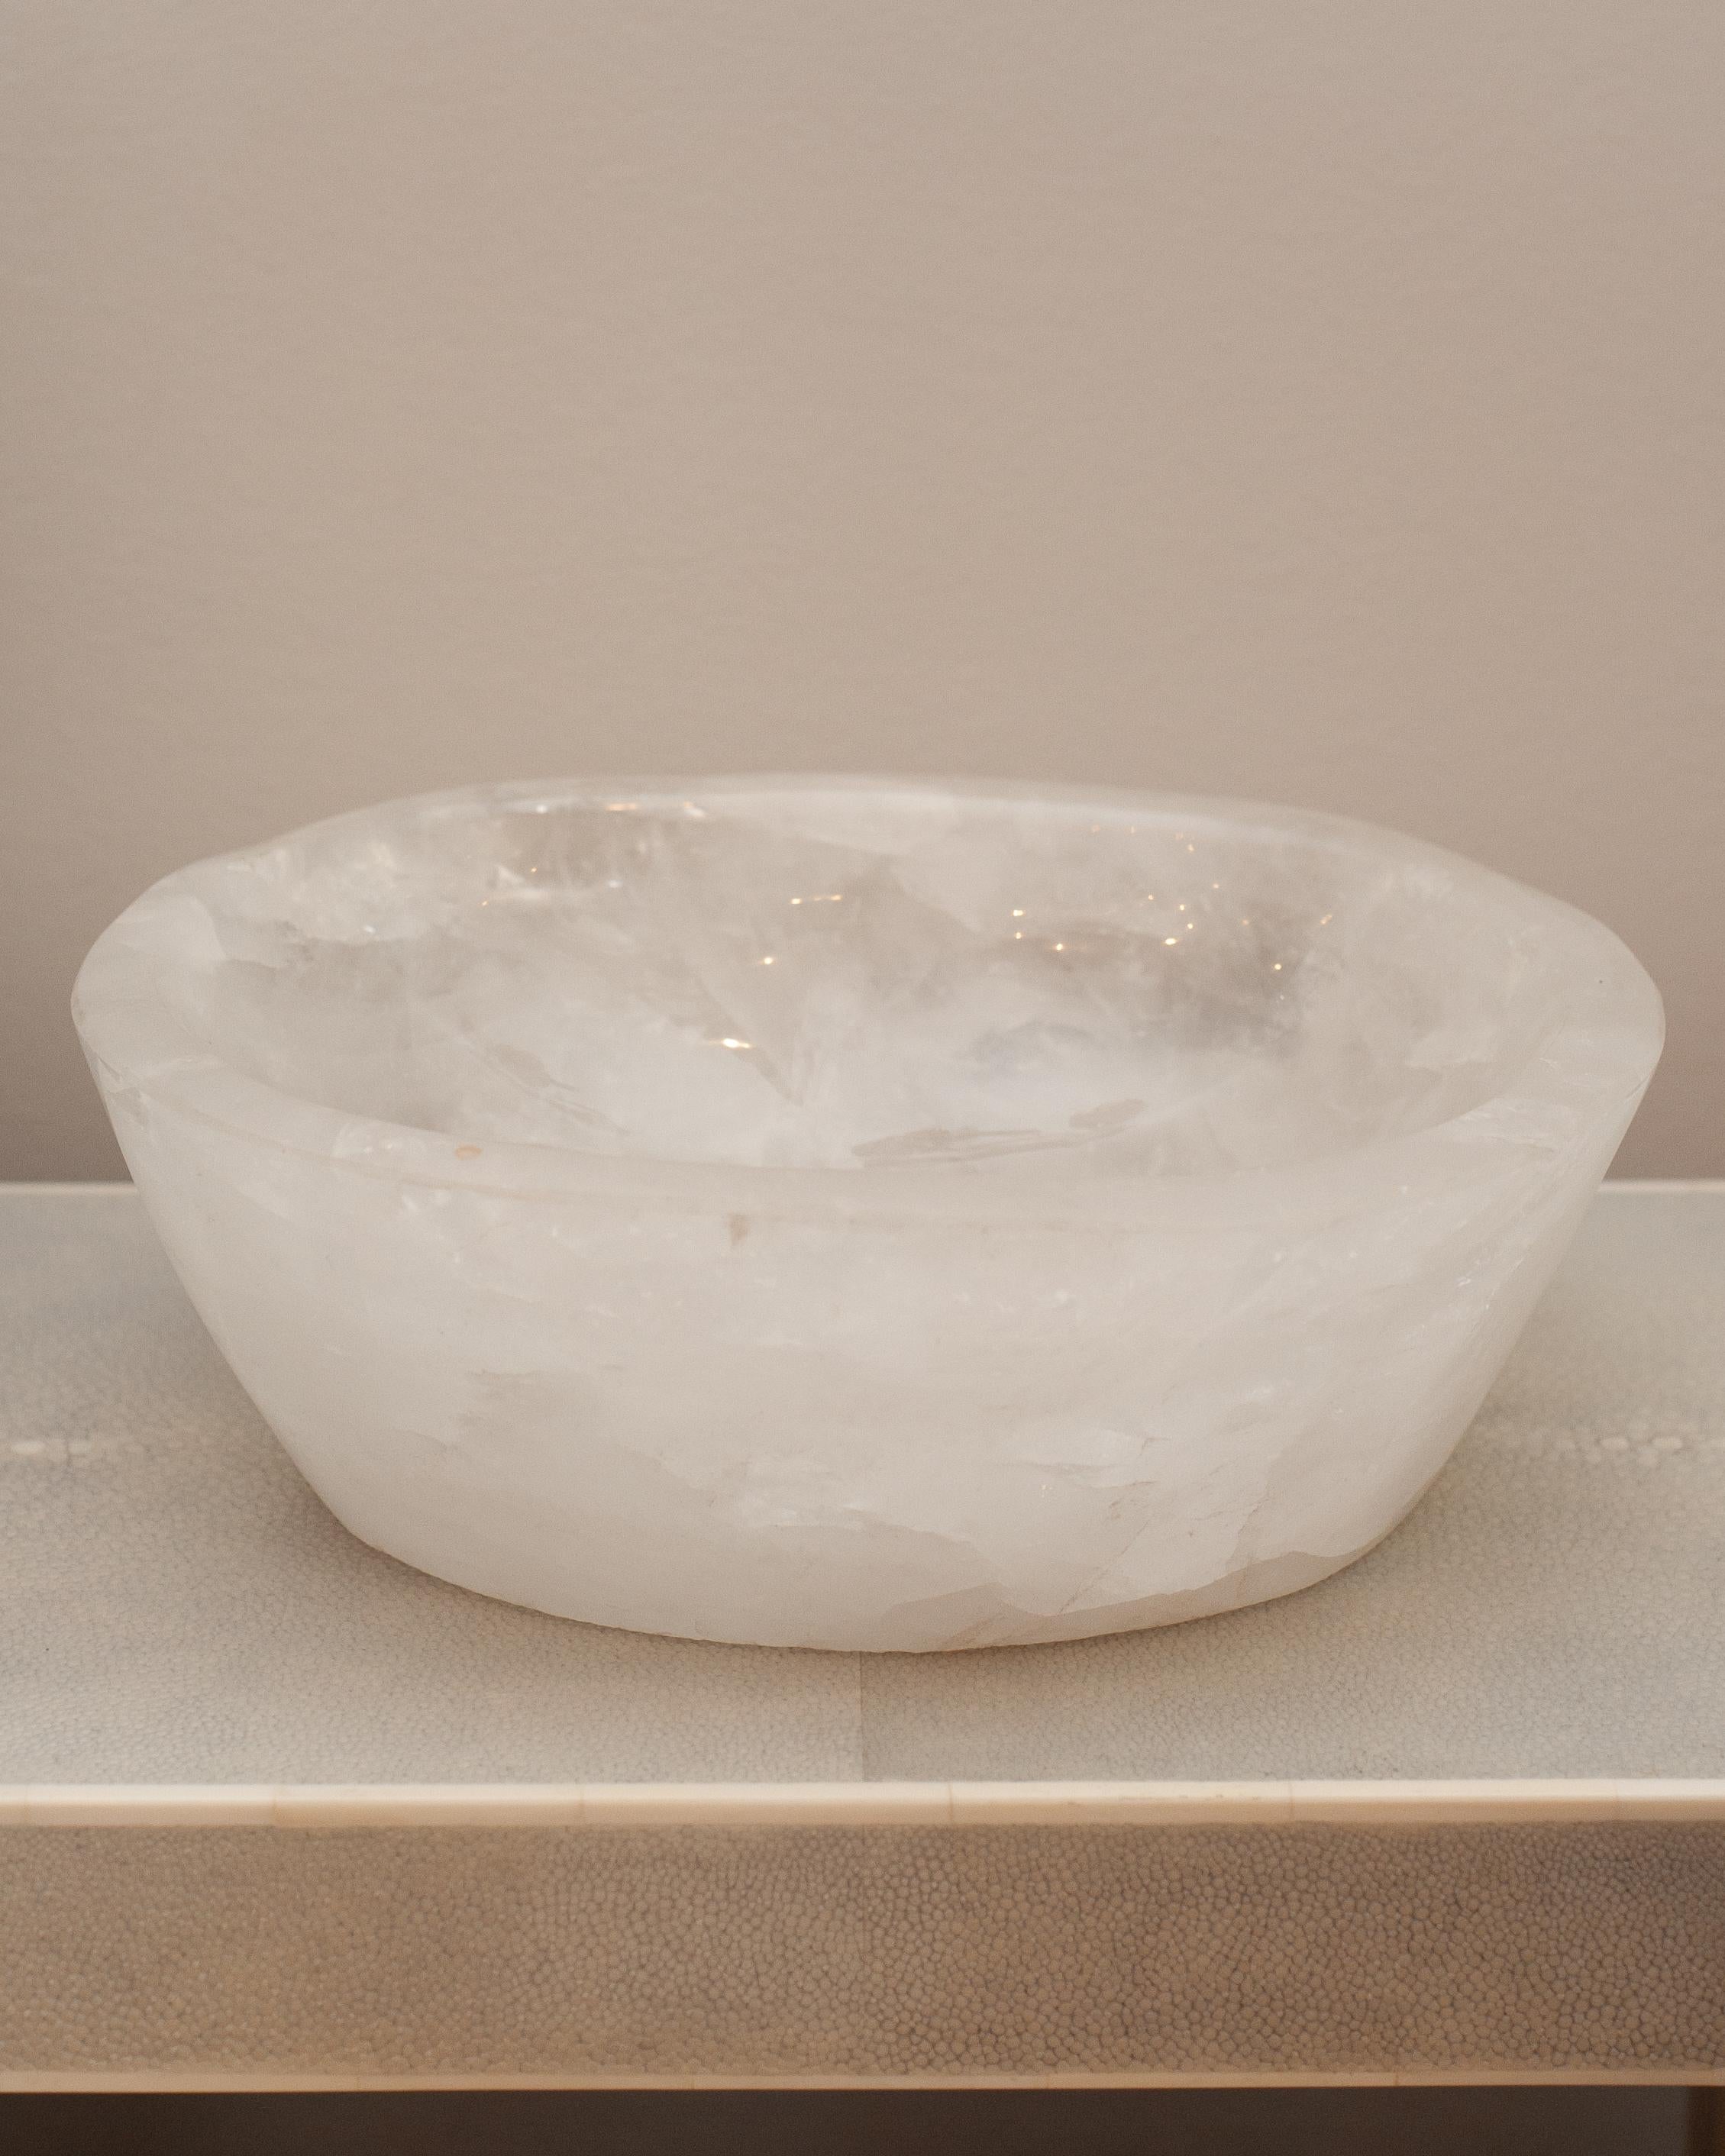 Bring the healing energy of rock crystal into your home with this beautiful carved bowl. This substantial and thick cut bowl can filled with candies or kept sculptural as an empty vessel and placed in any space.